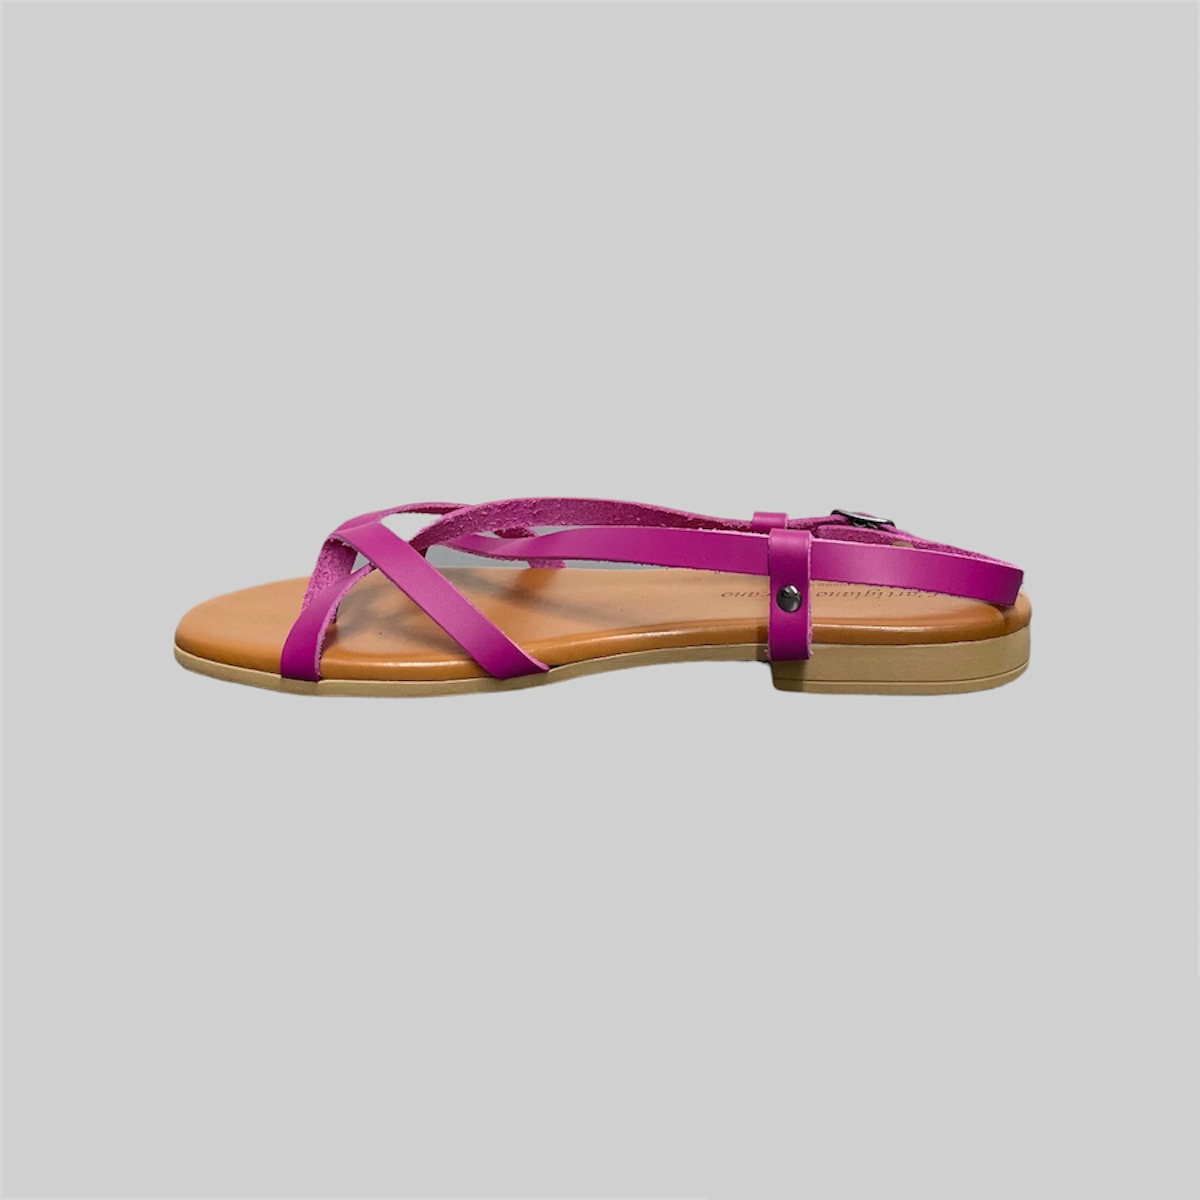 Sandal with strap